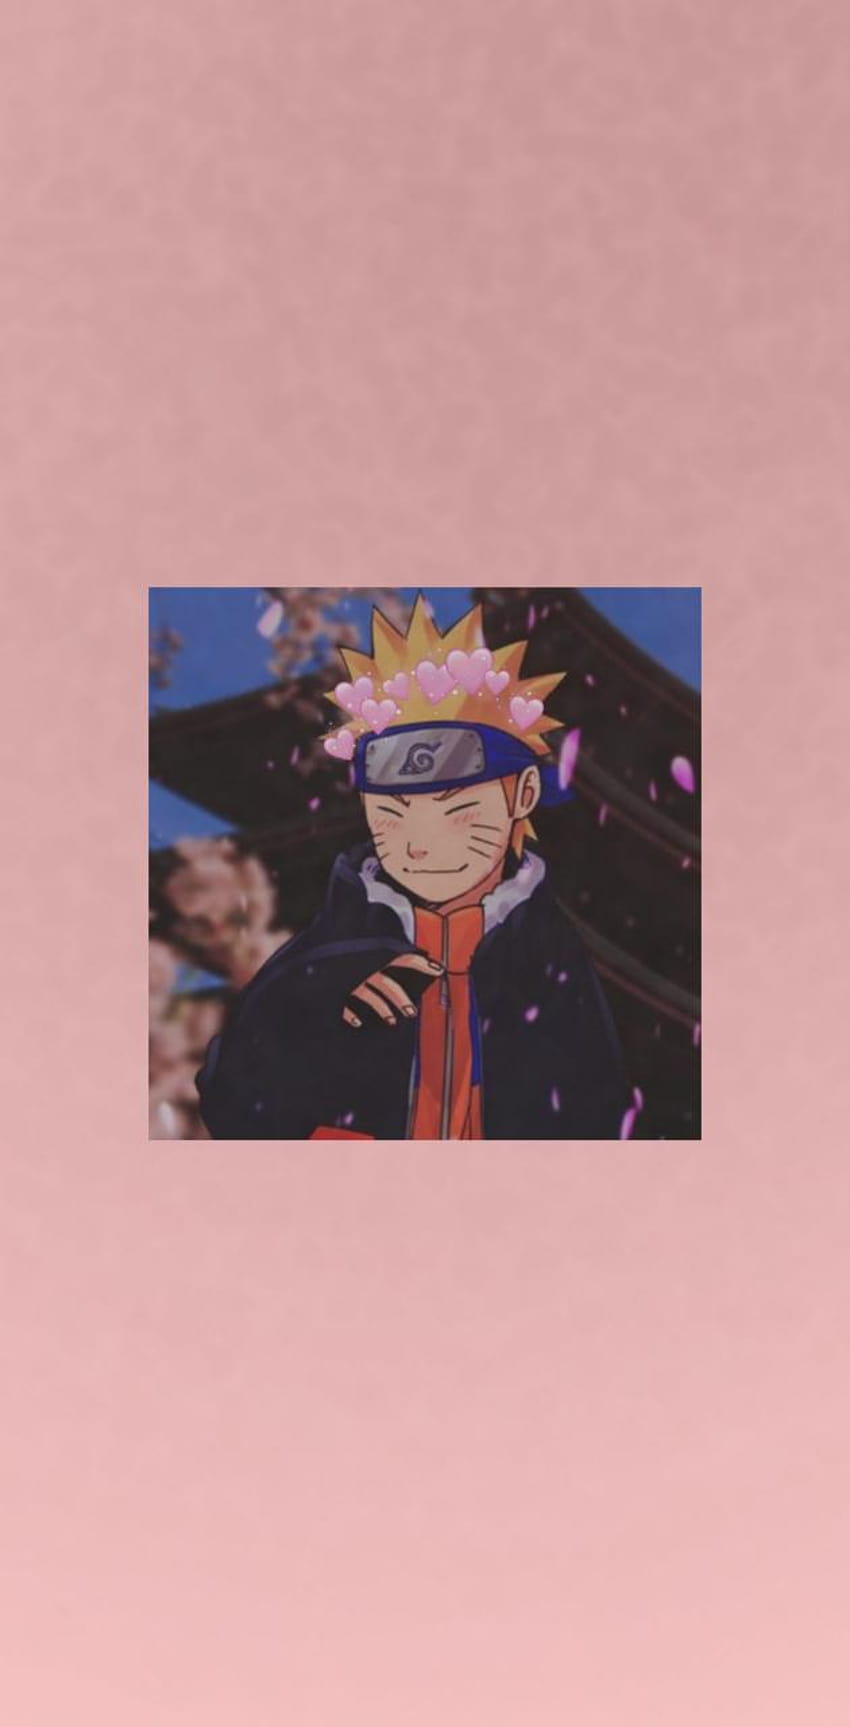 Image tagged with Naruto triste wallpaper on Tumblr